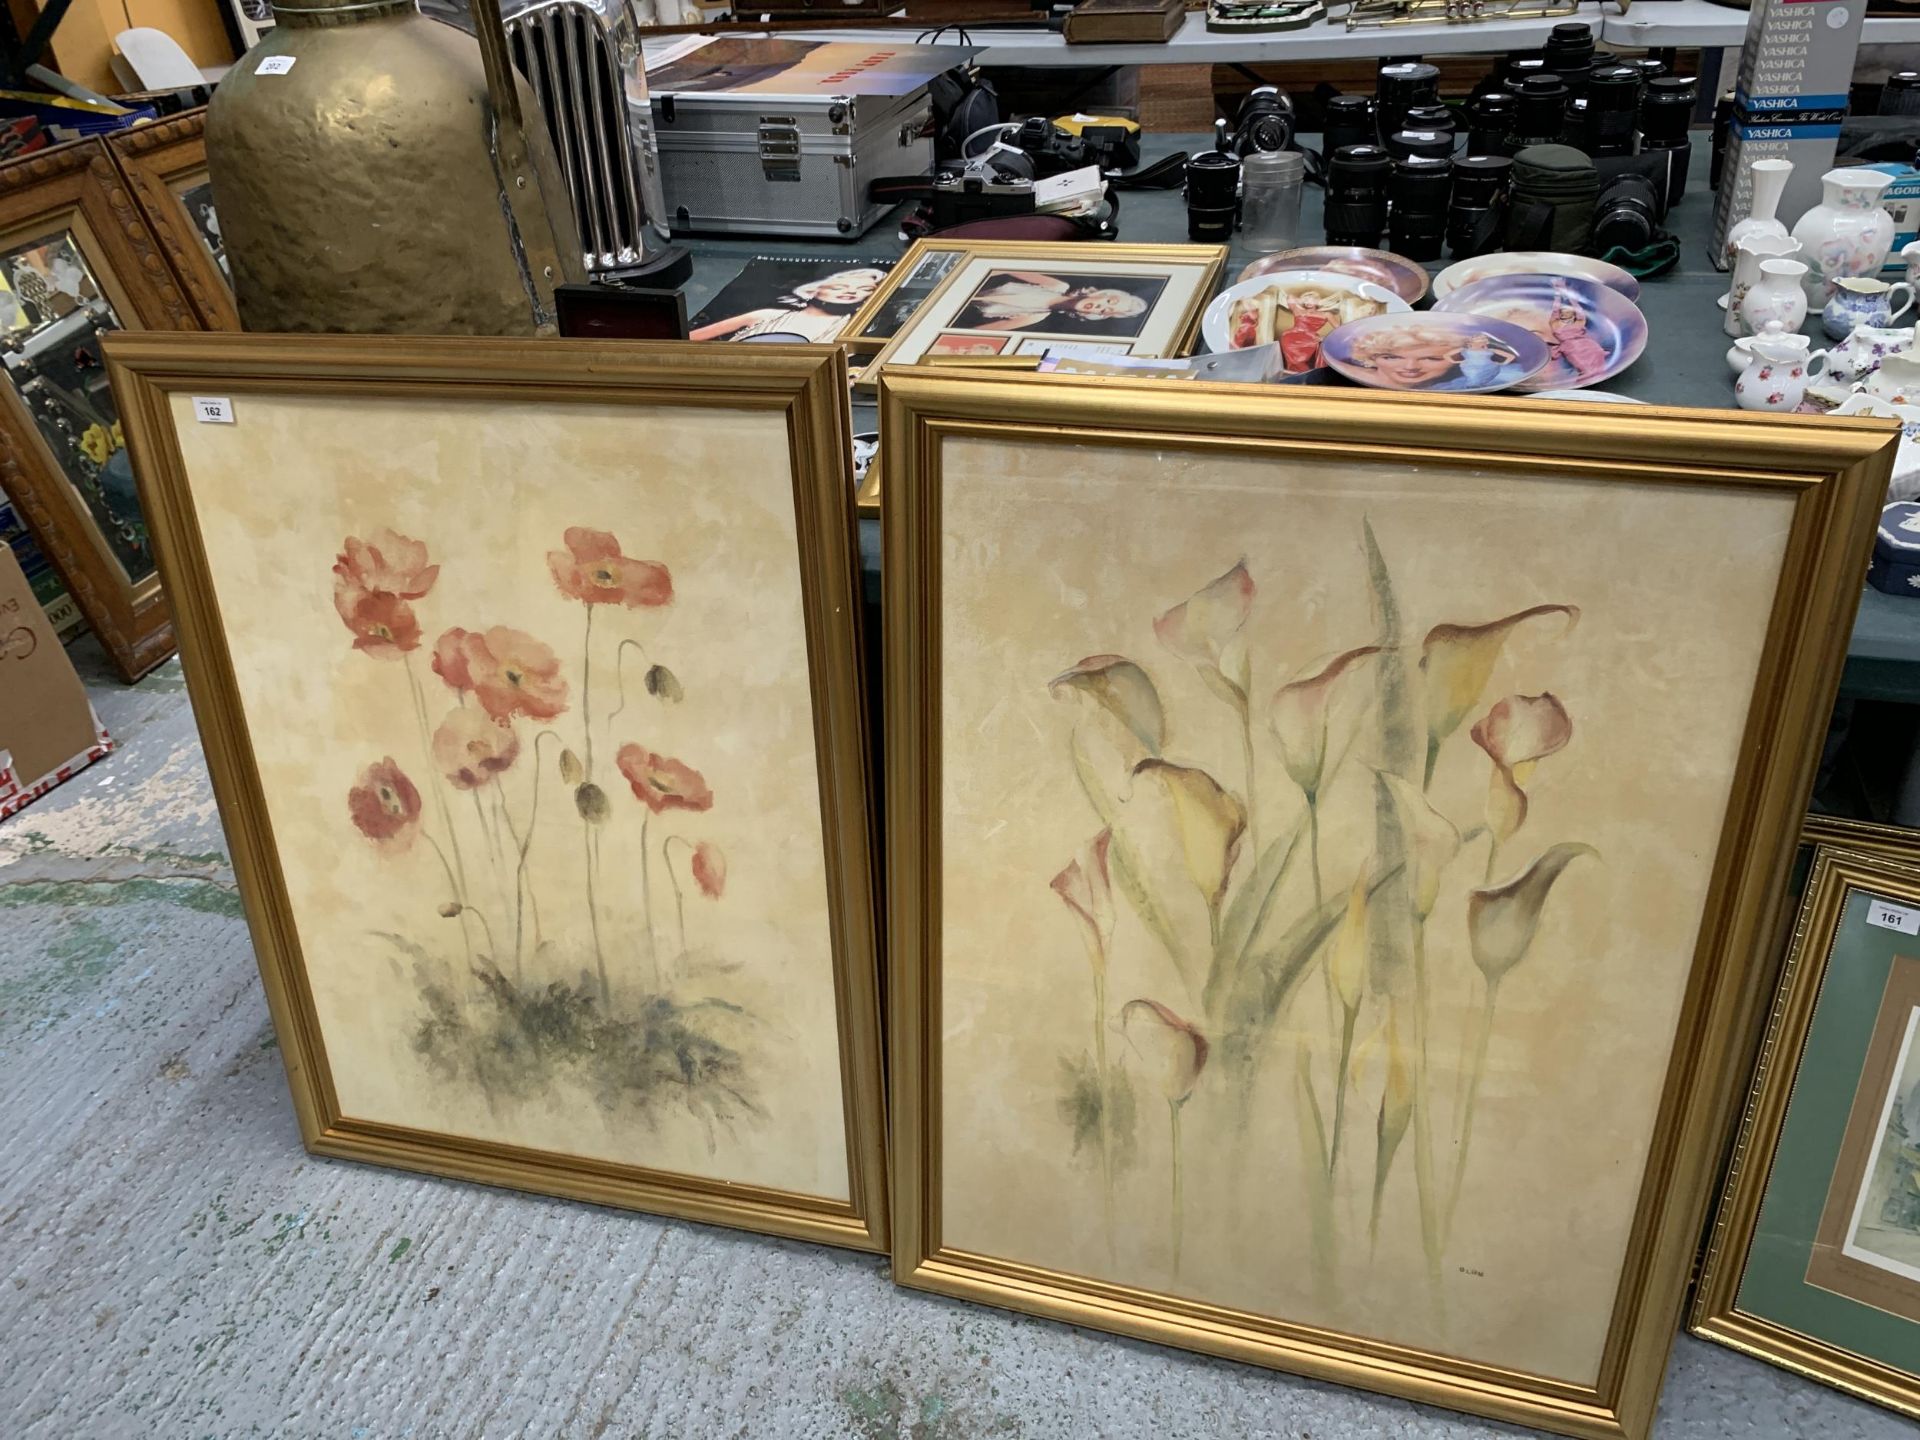 TWO FRAMED FLORAL PRINTS BY BLUM, 35" X 27"